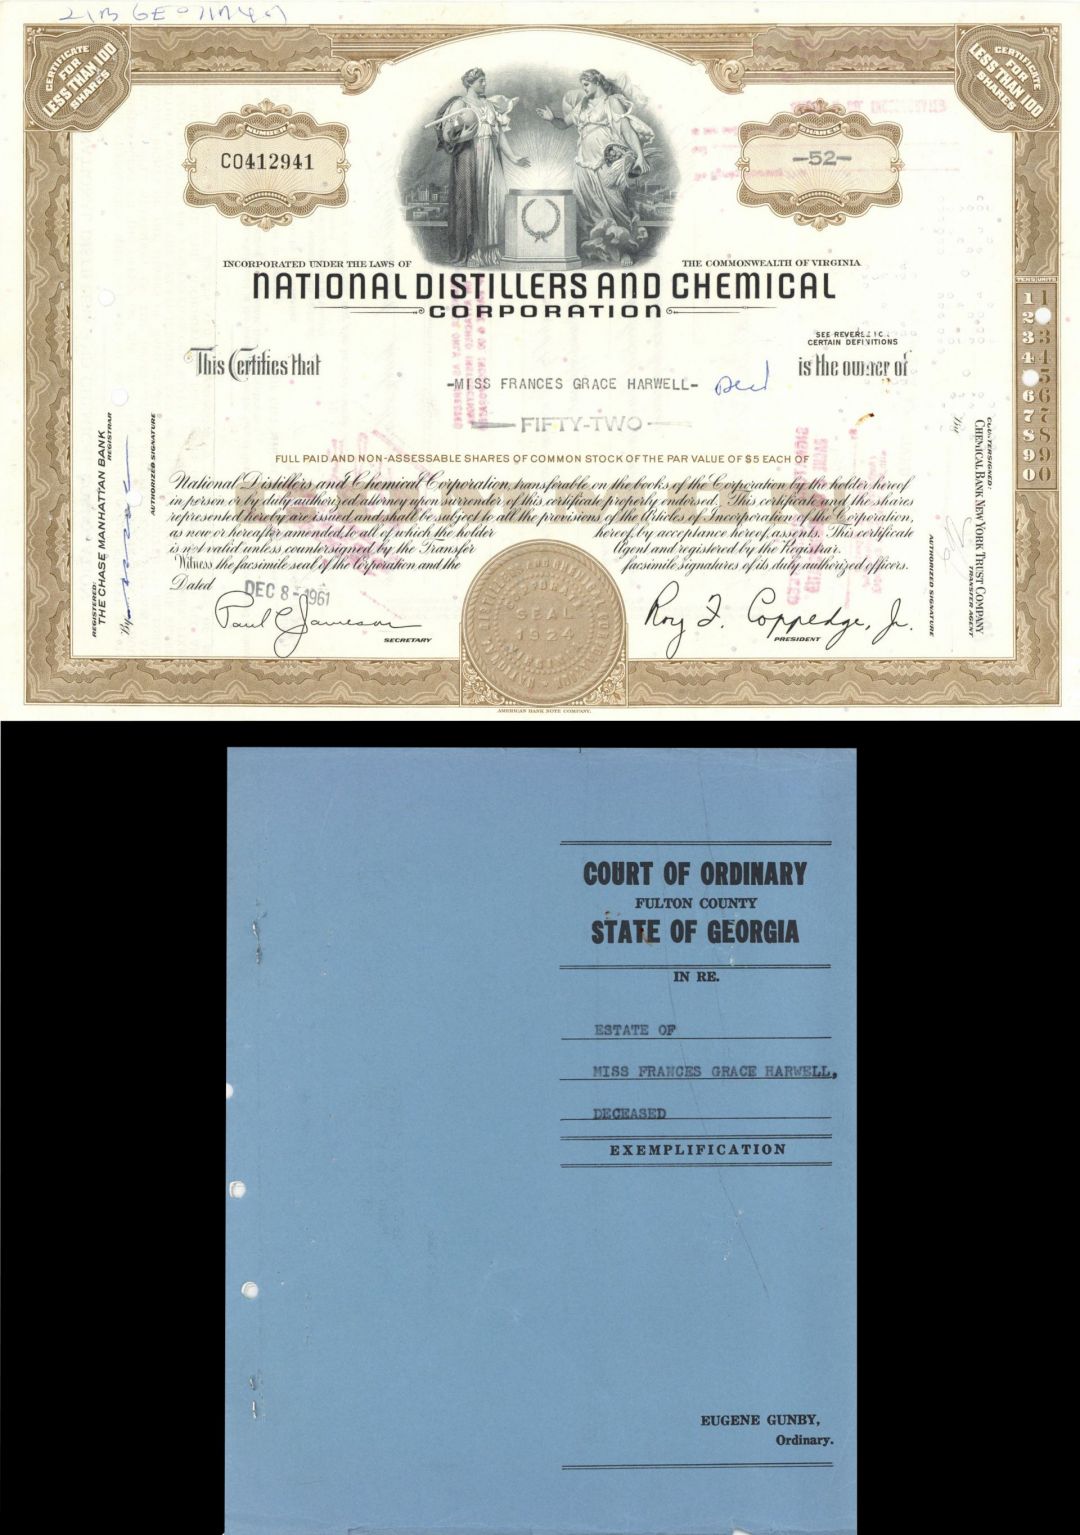 National Distillers and Chemical Corp. - 1961 dated Stock Certificate